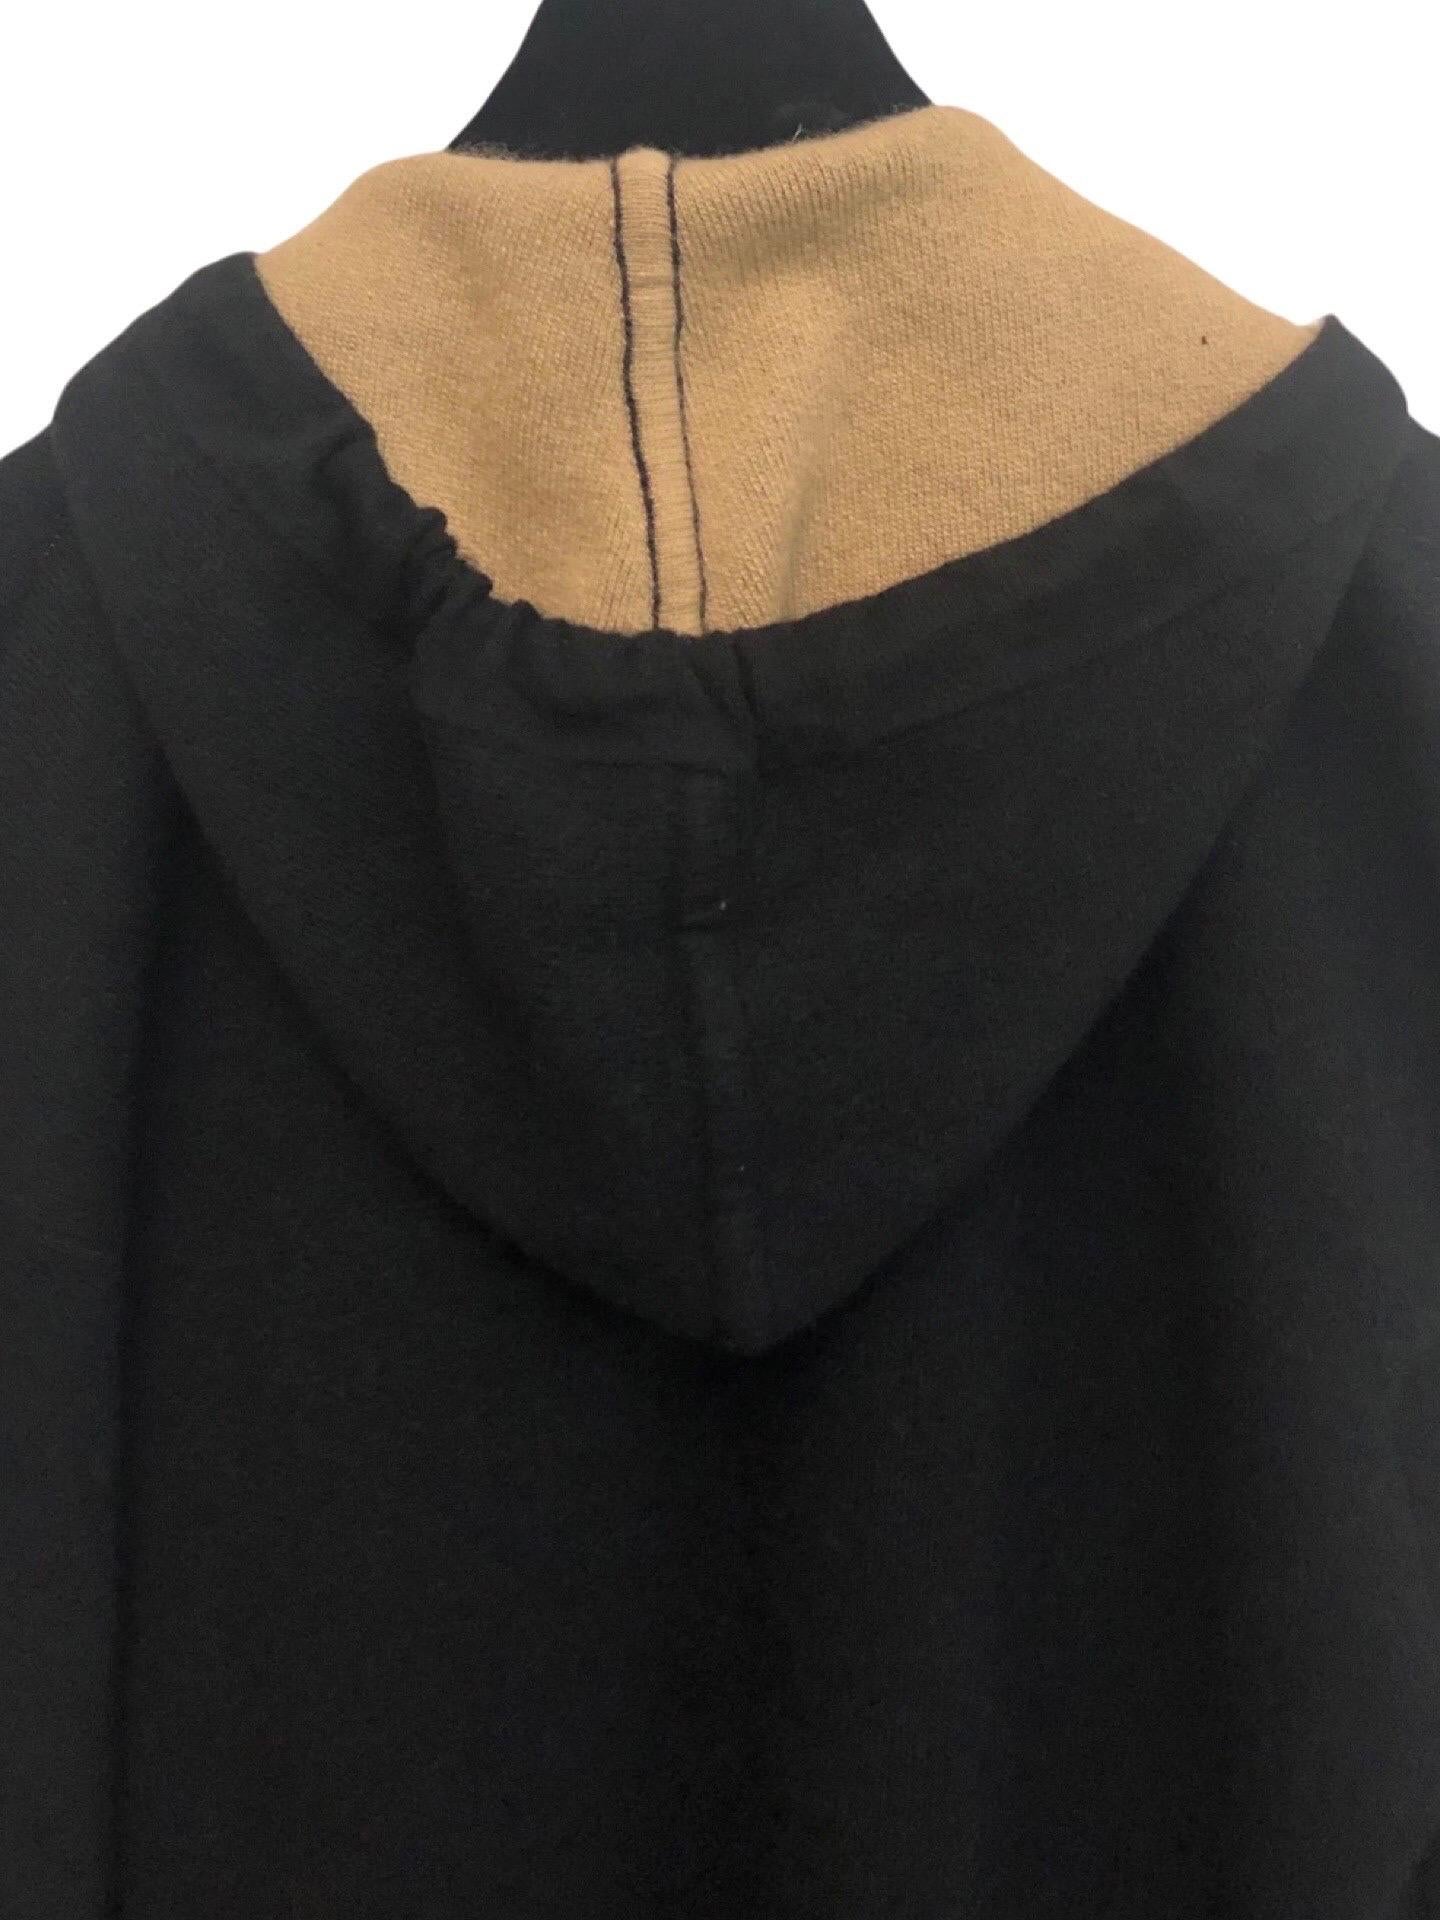 Chanel Black and Camel  Cashmere Zipper Long Cardigan  In Excellent Condition For Sale In Sheung Wan, HK